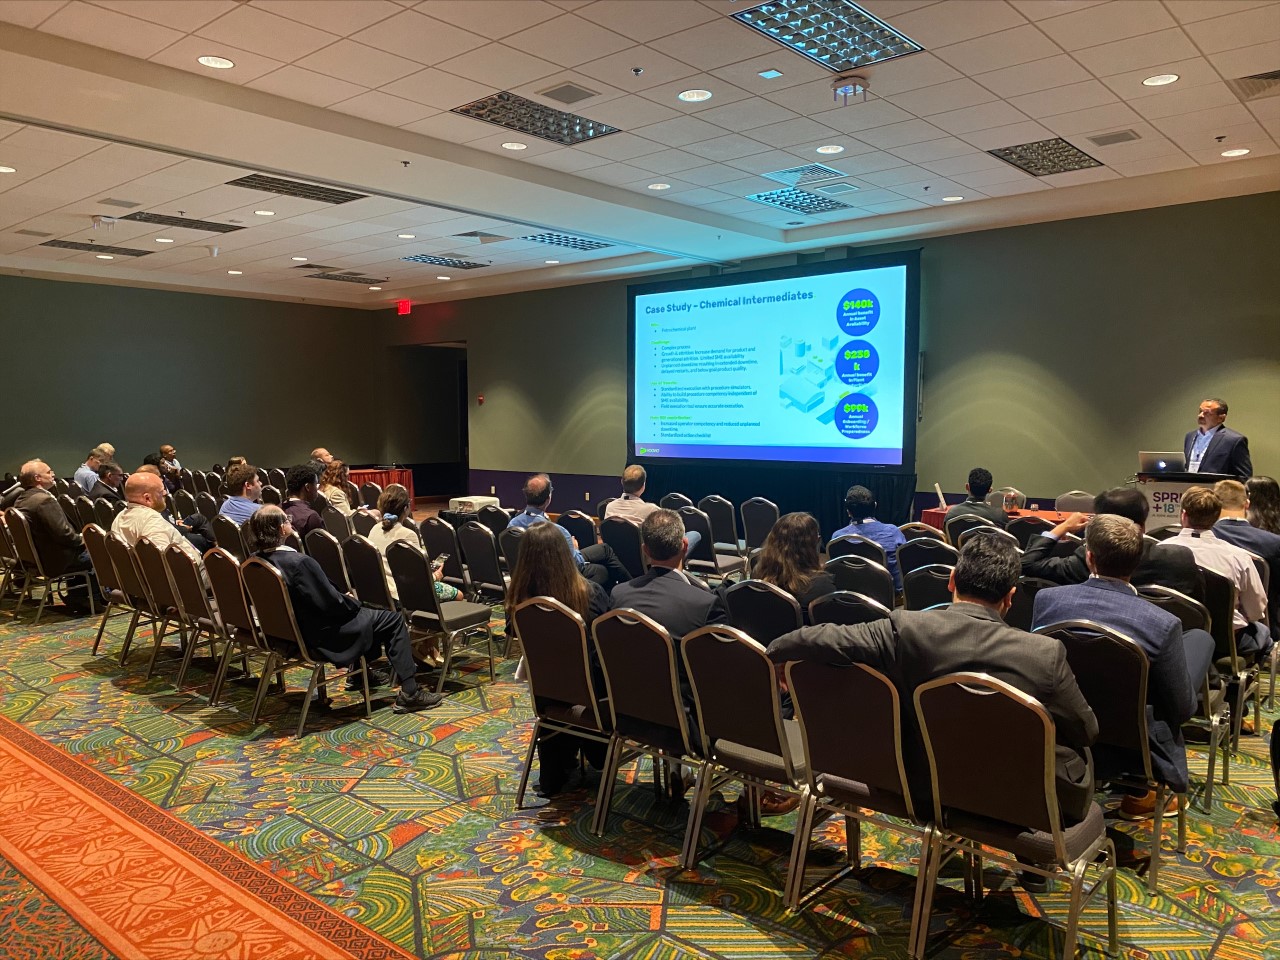 Key takeaways from Voovio at the AIChE Spring Meeting 2022